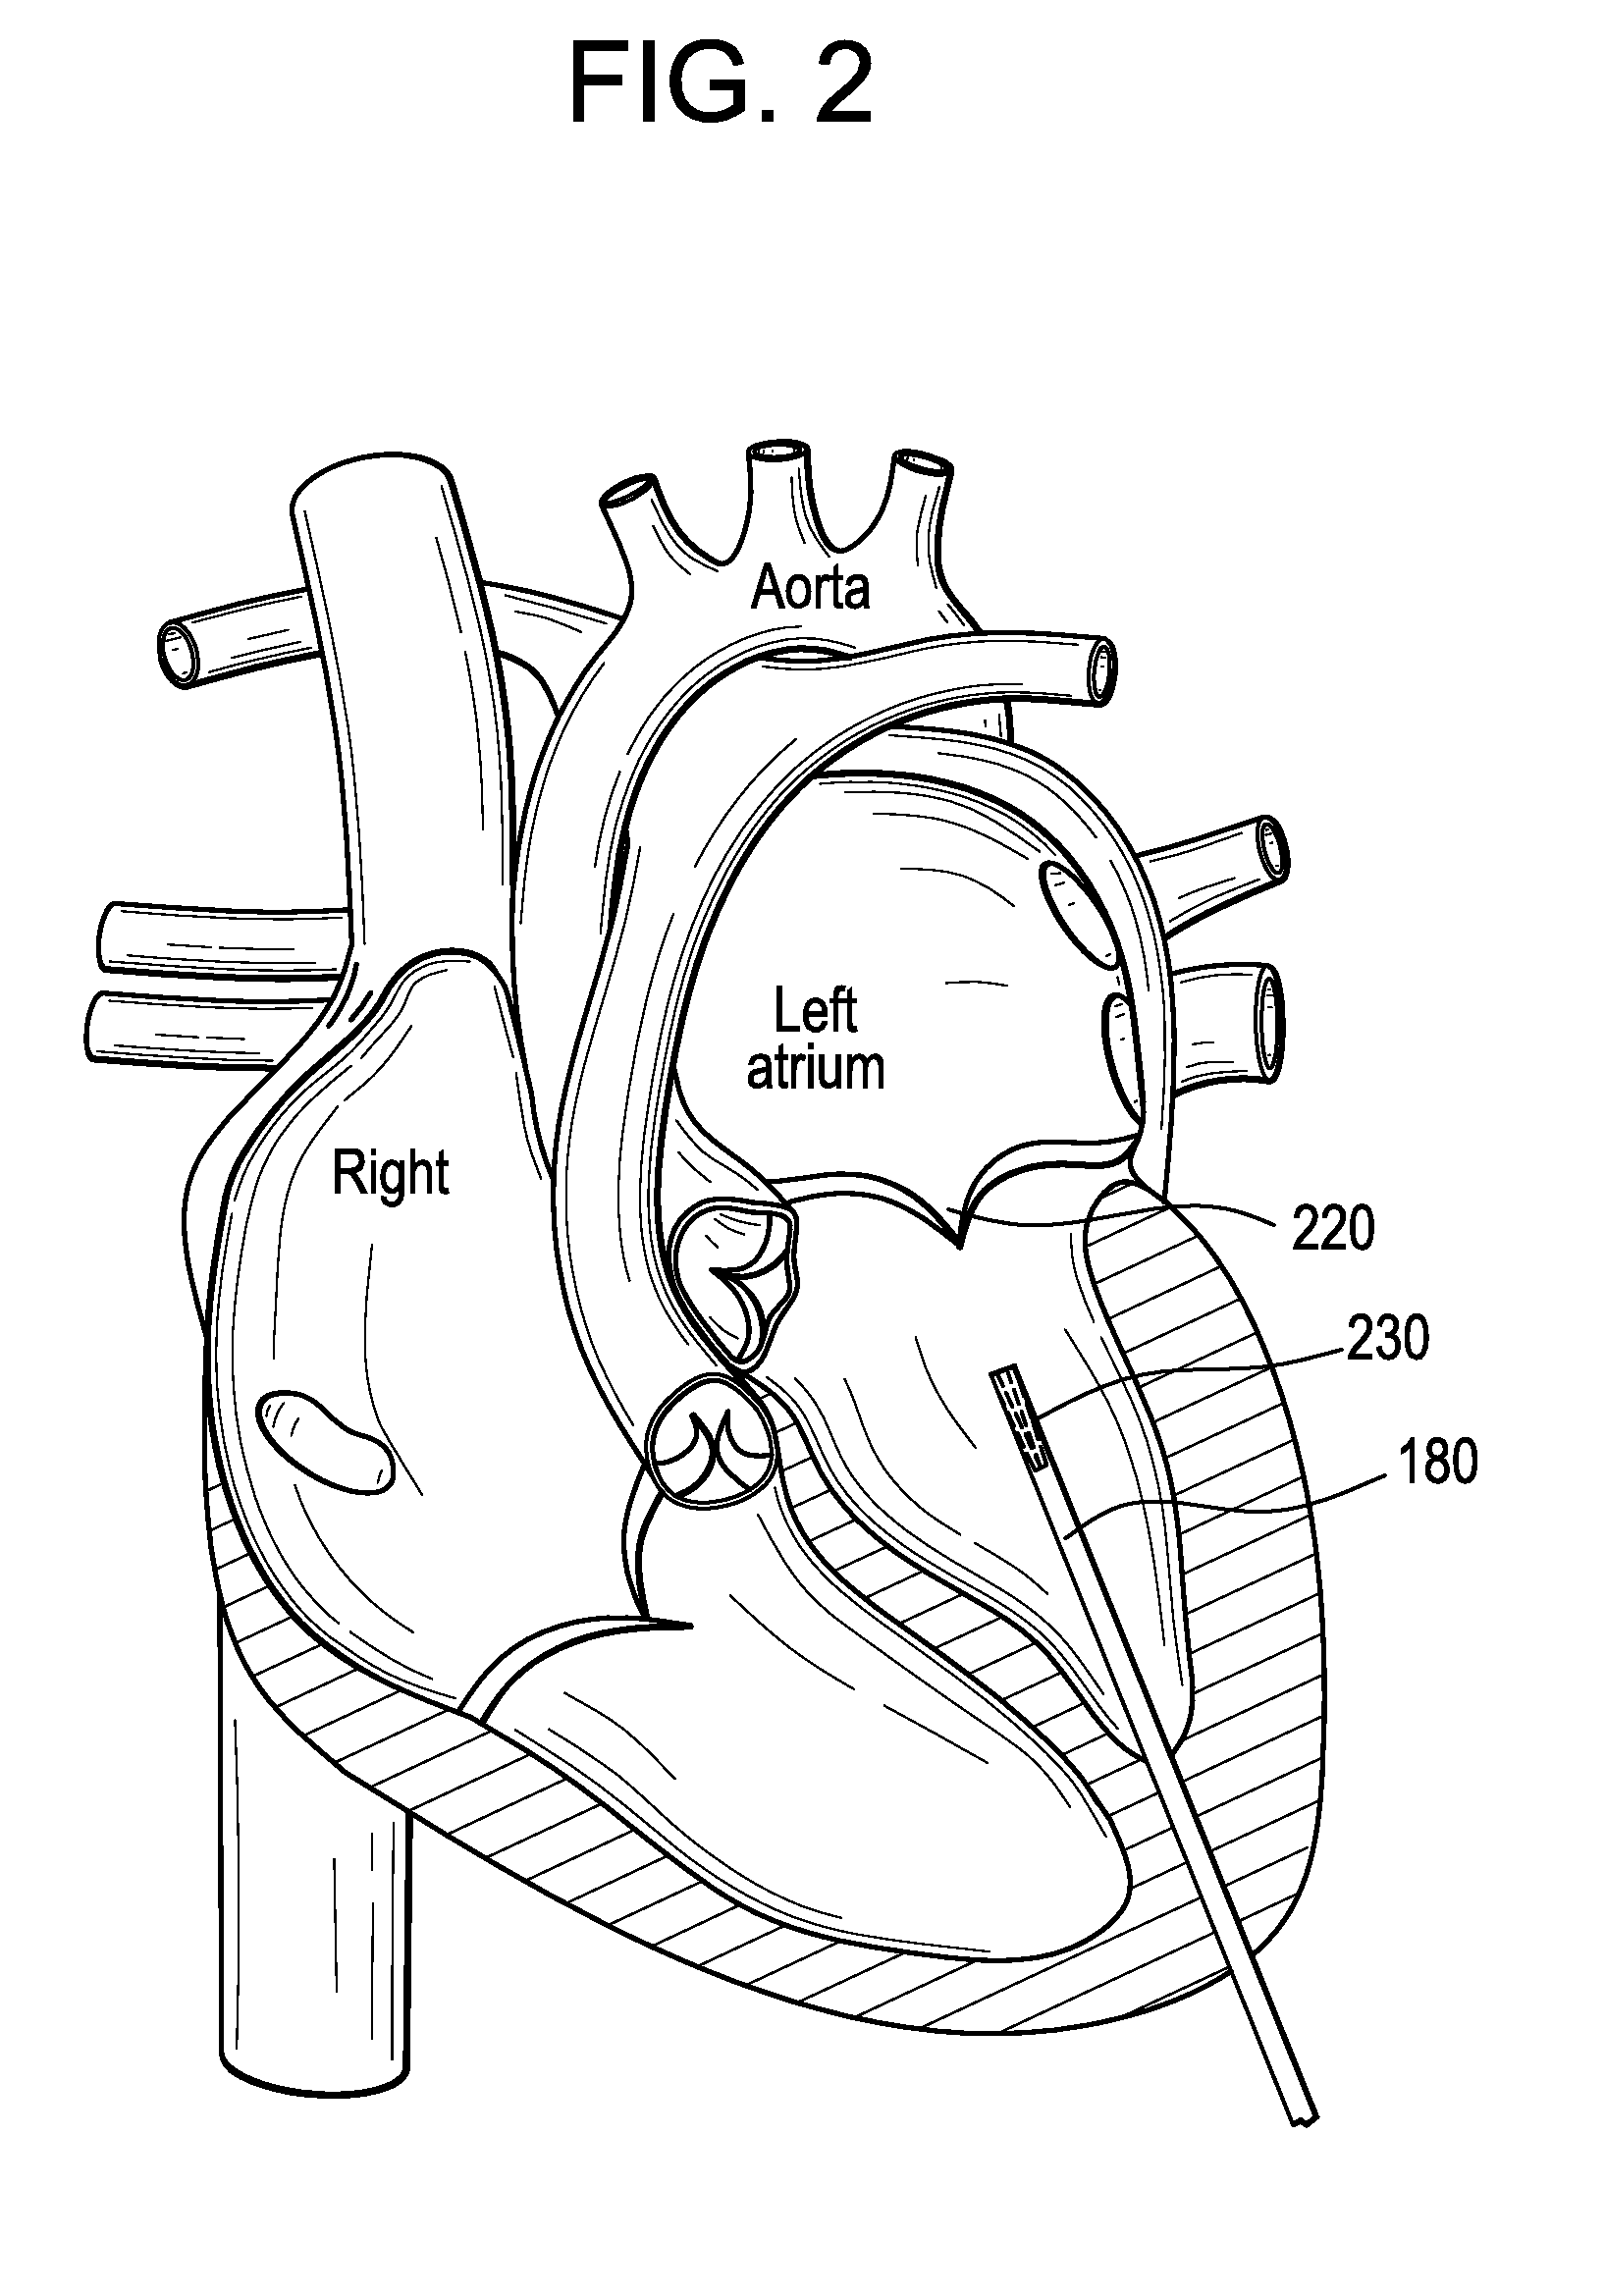 Multi-component designs for heart valve retrieval device, sealing structures and stent assembly